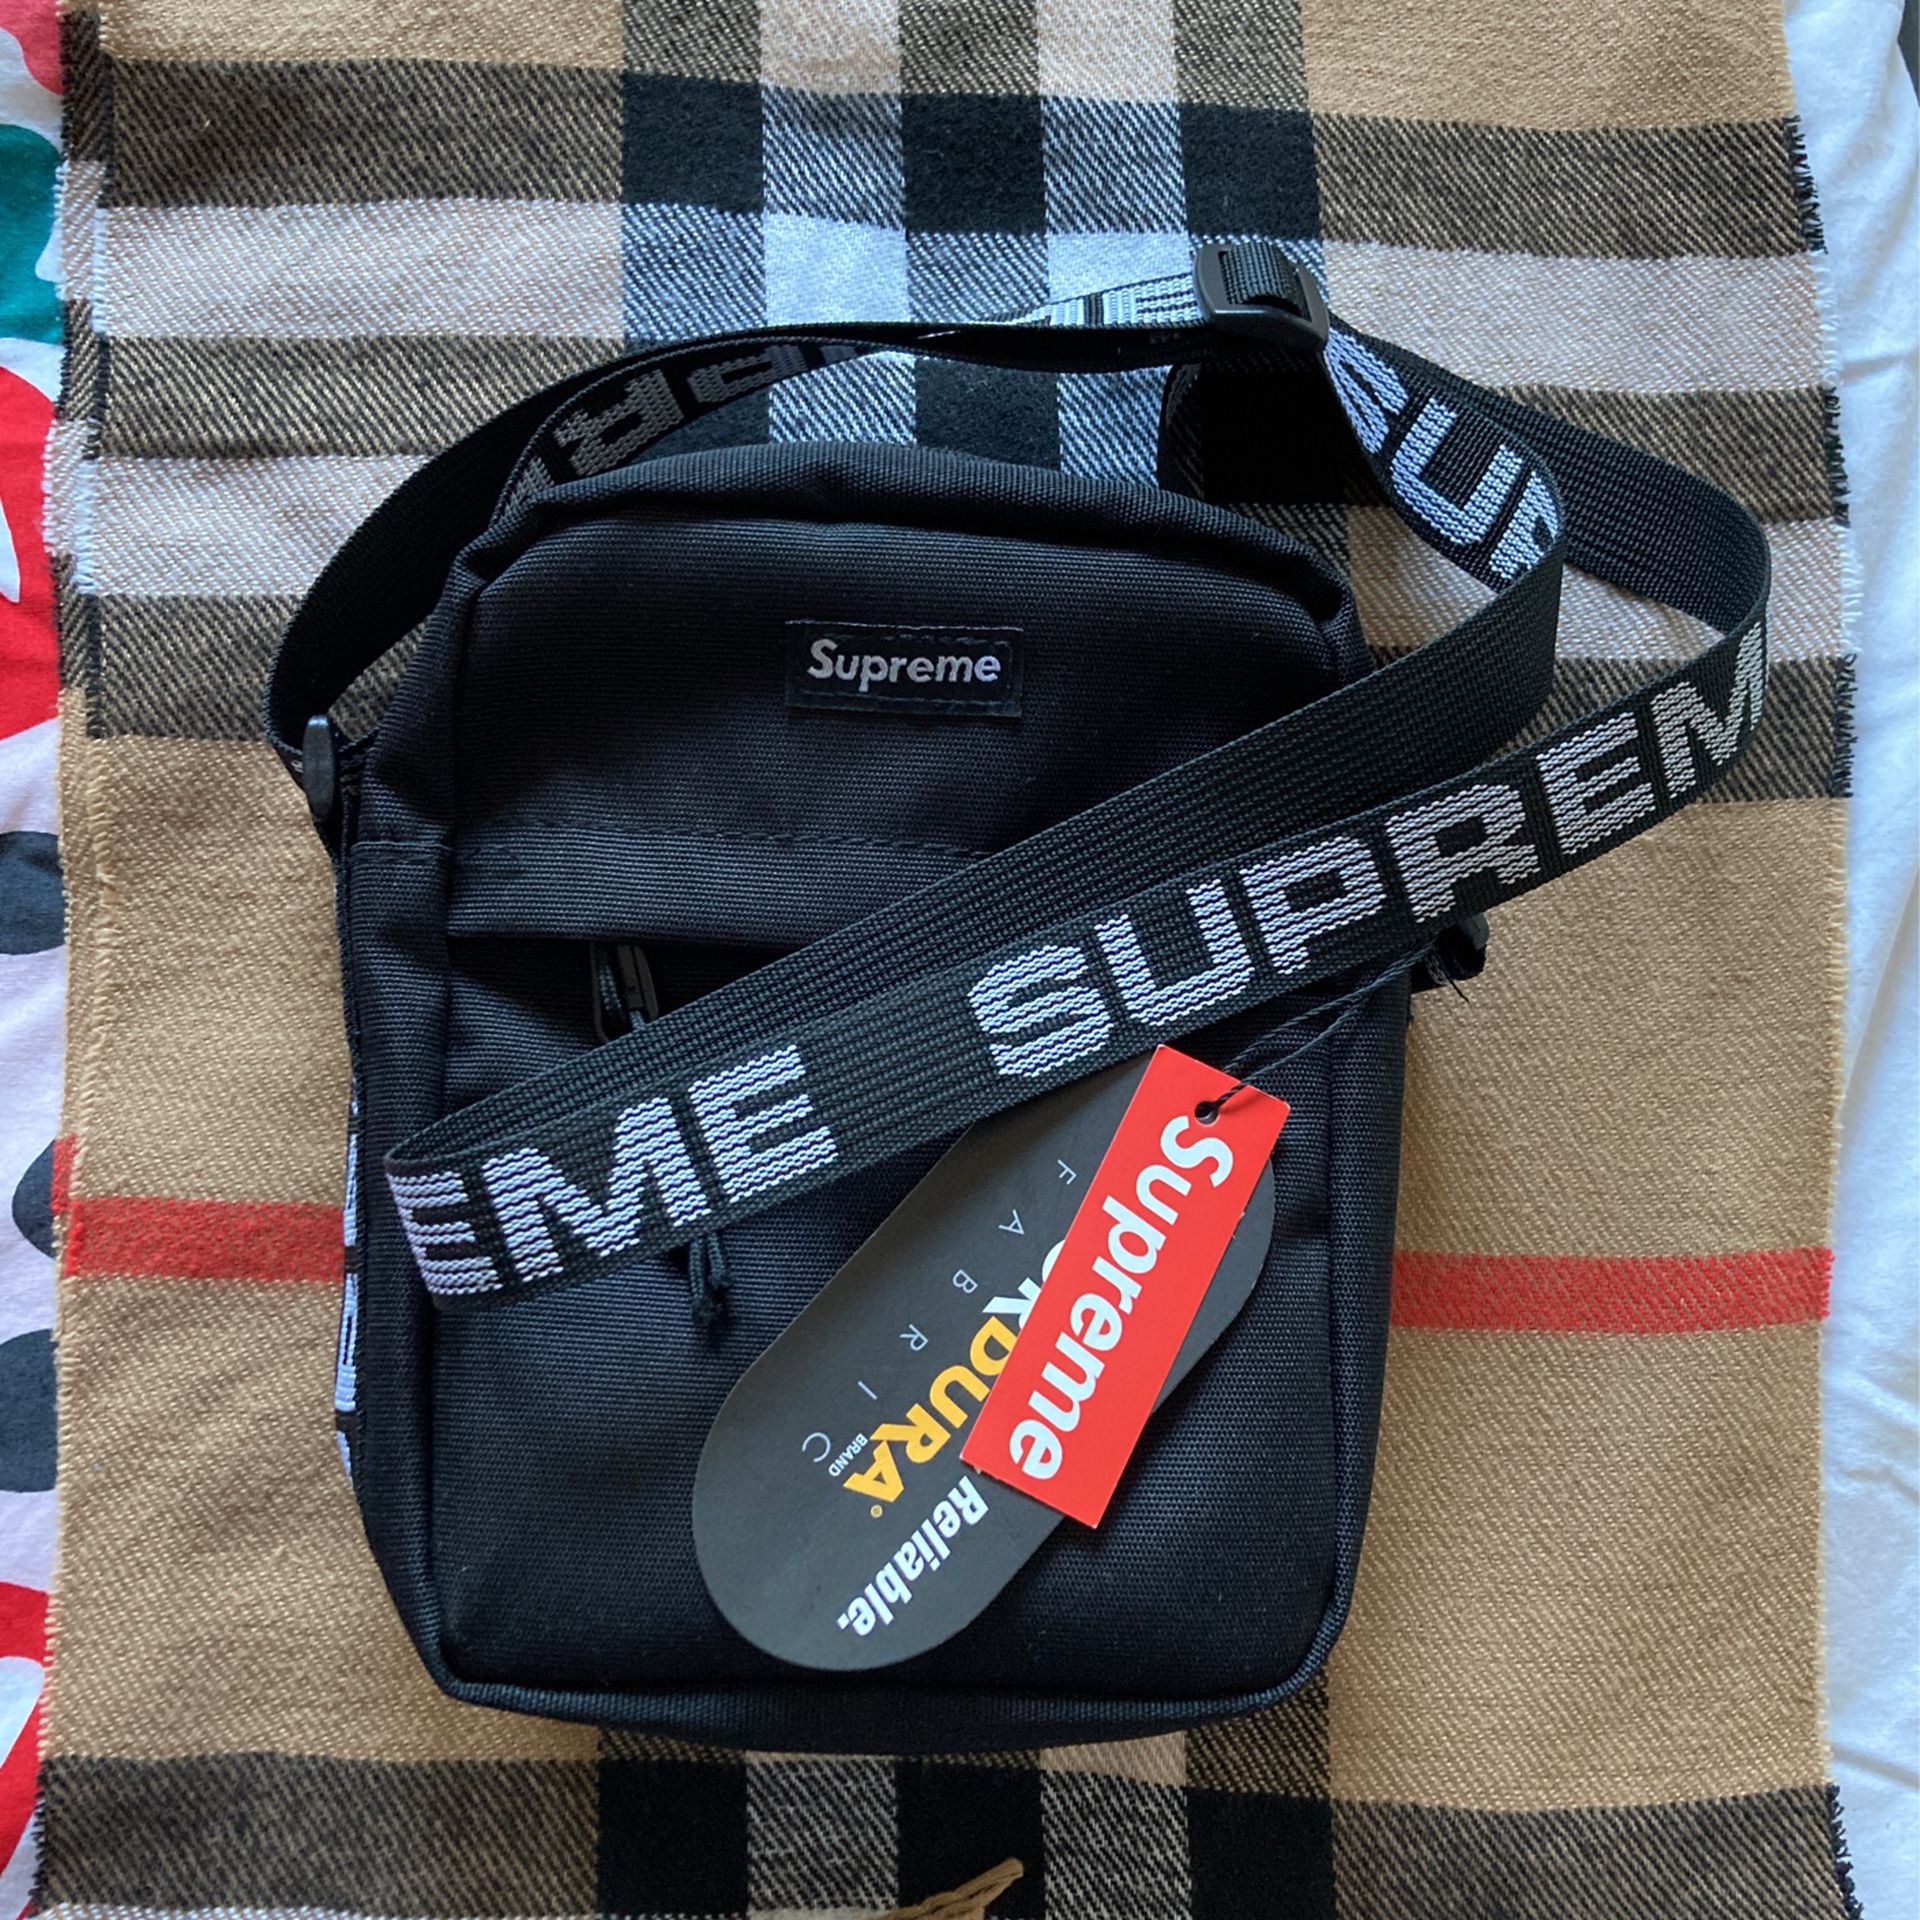 tank Mania frequency Supreme Shoulder Bag (SS18) Black for Sale in Milpitas, CA - OfferUp